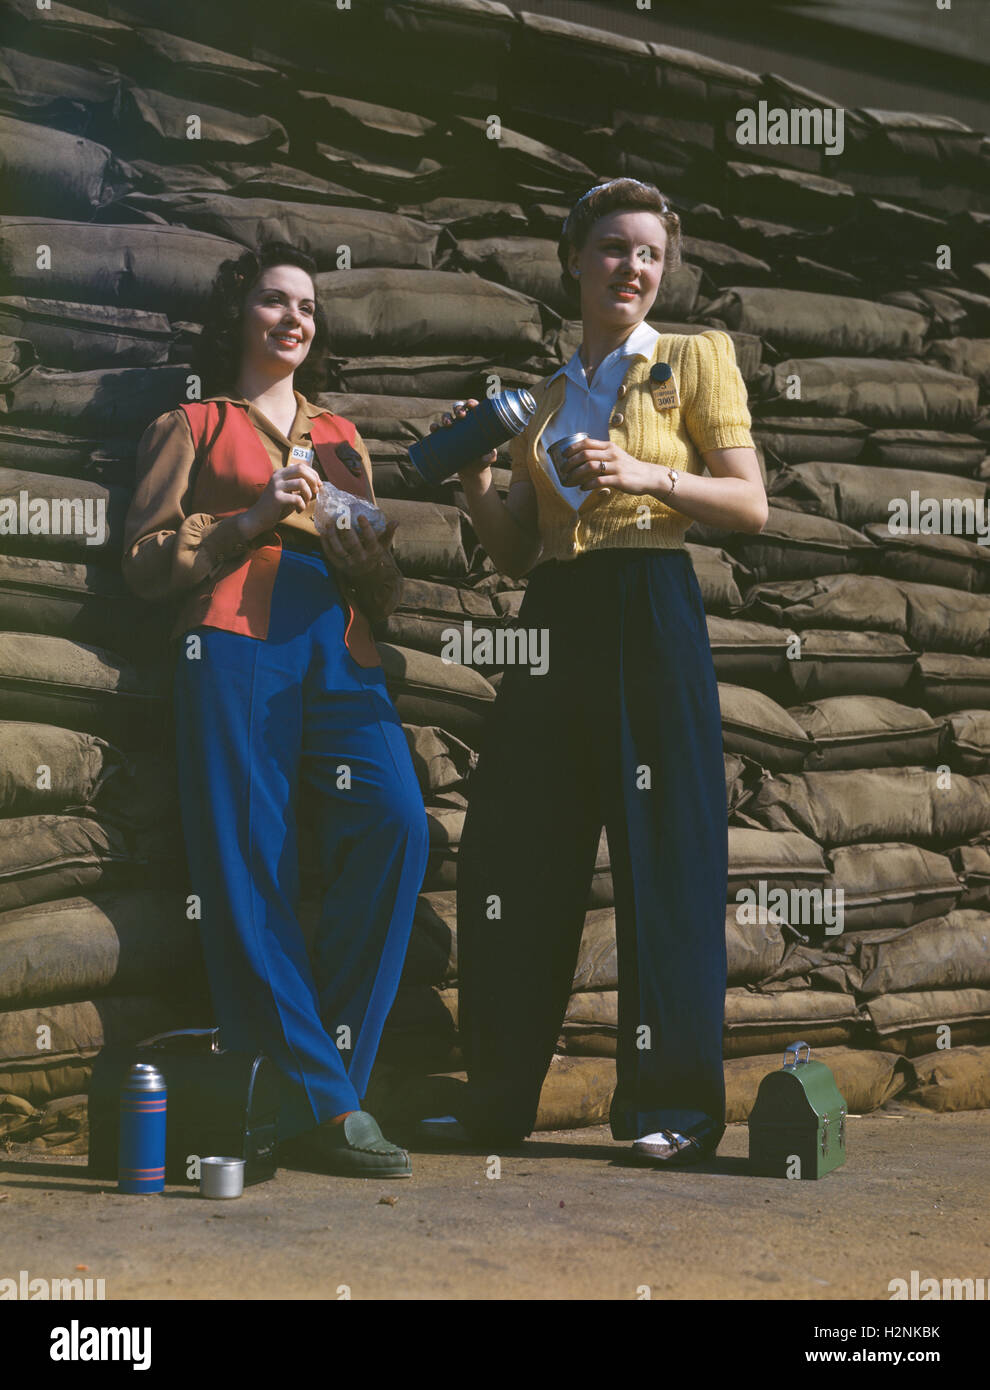 Two Female Factory Workers on Lunch Break, Douglas Aircraft Company, Long Beach, California, USA, Alfred T. Palmer, U.S. Office of War Information, October 1942 Stock Photo